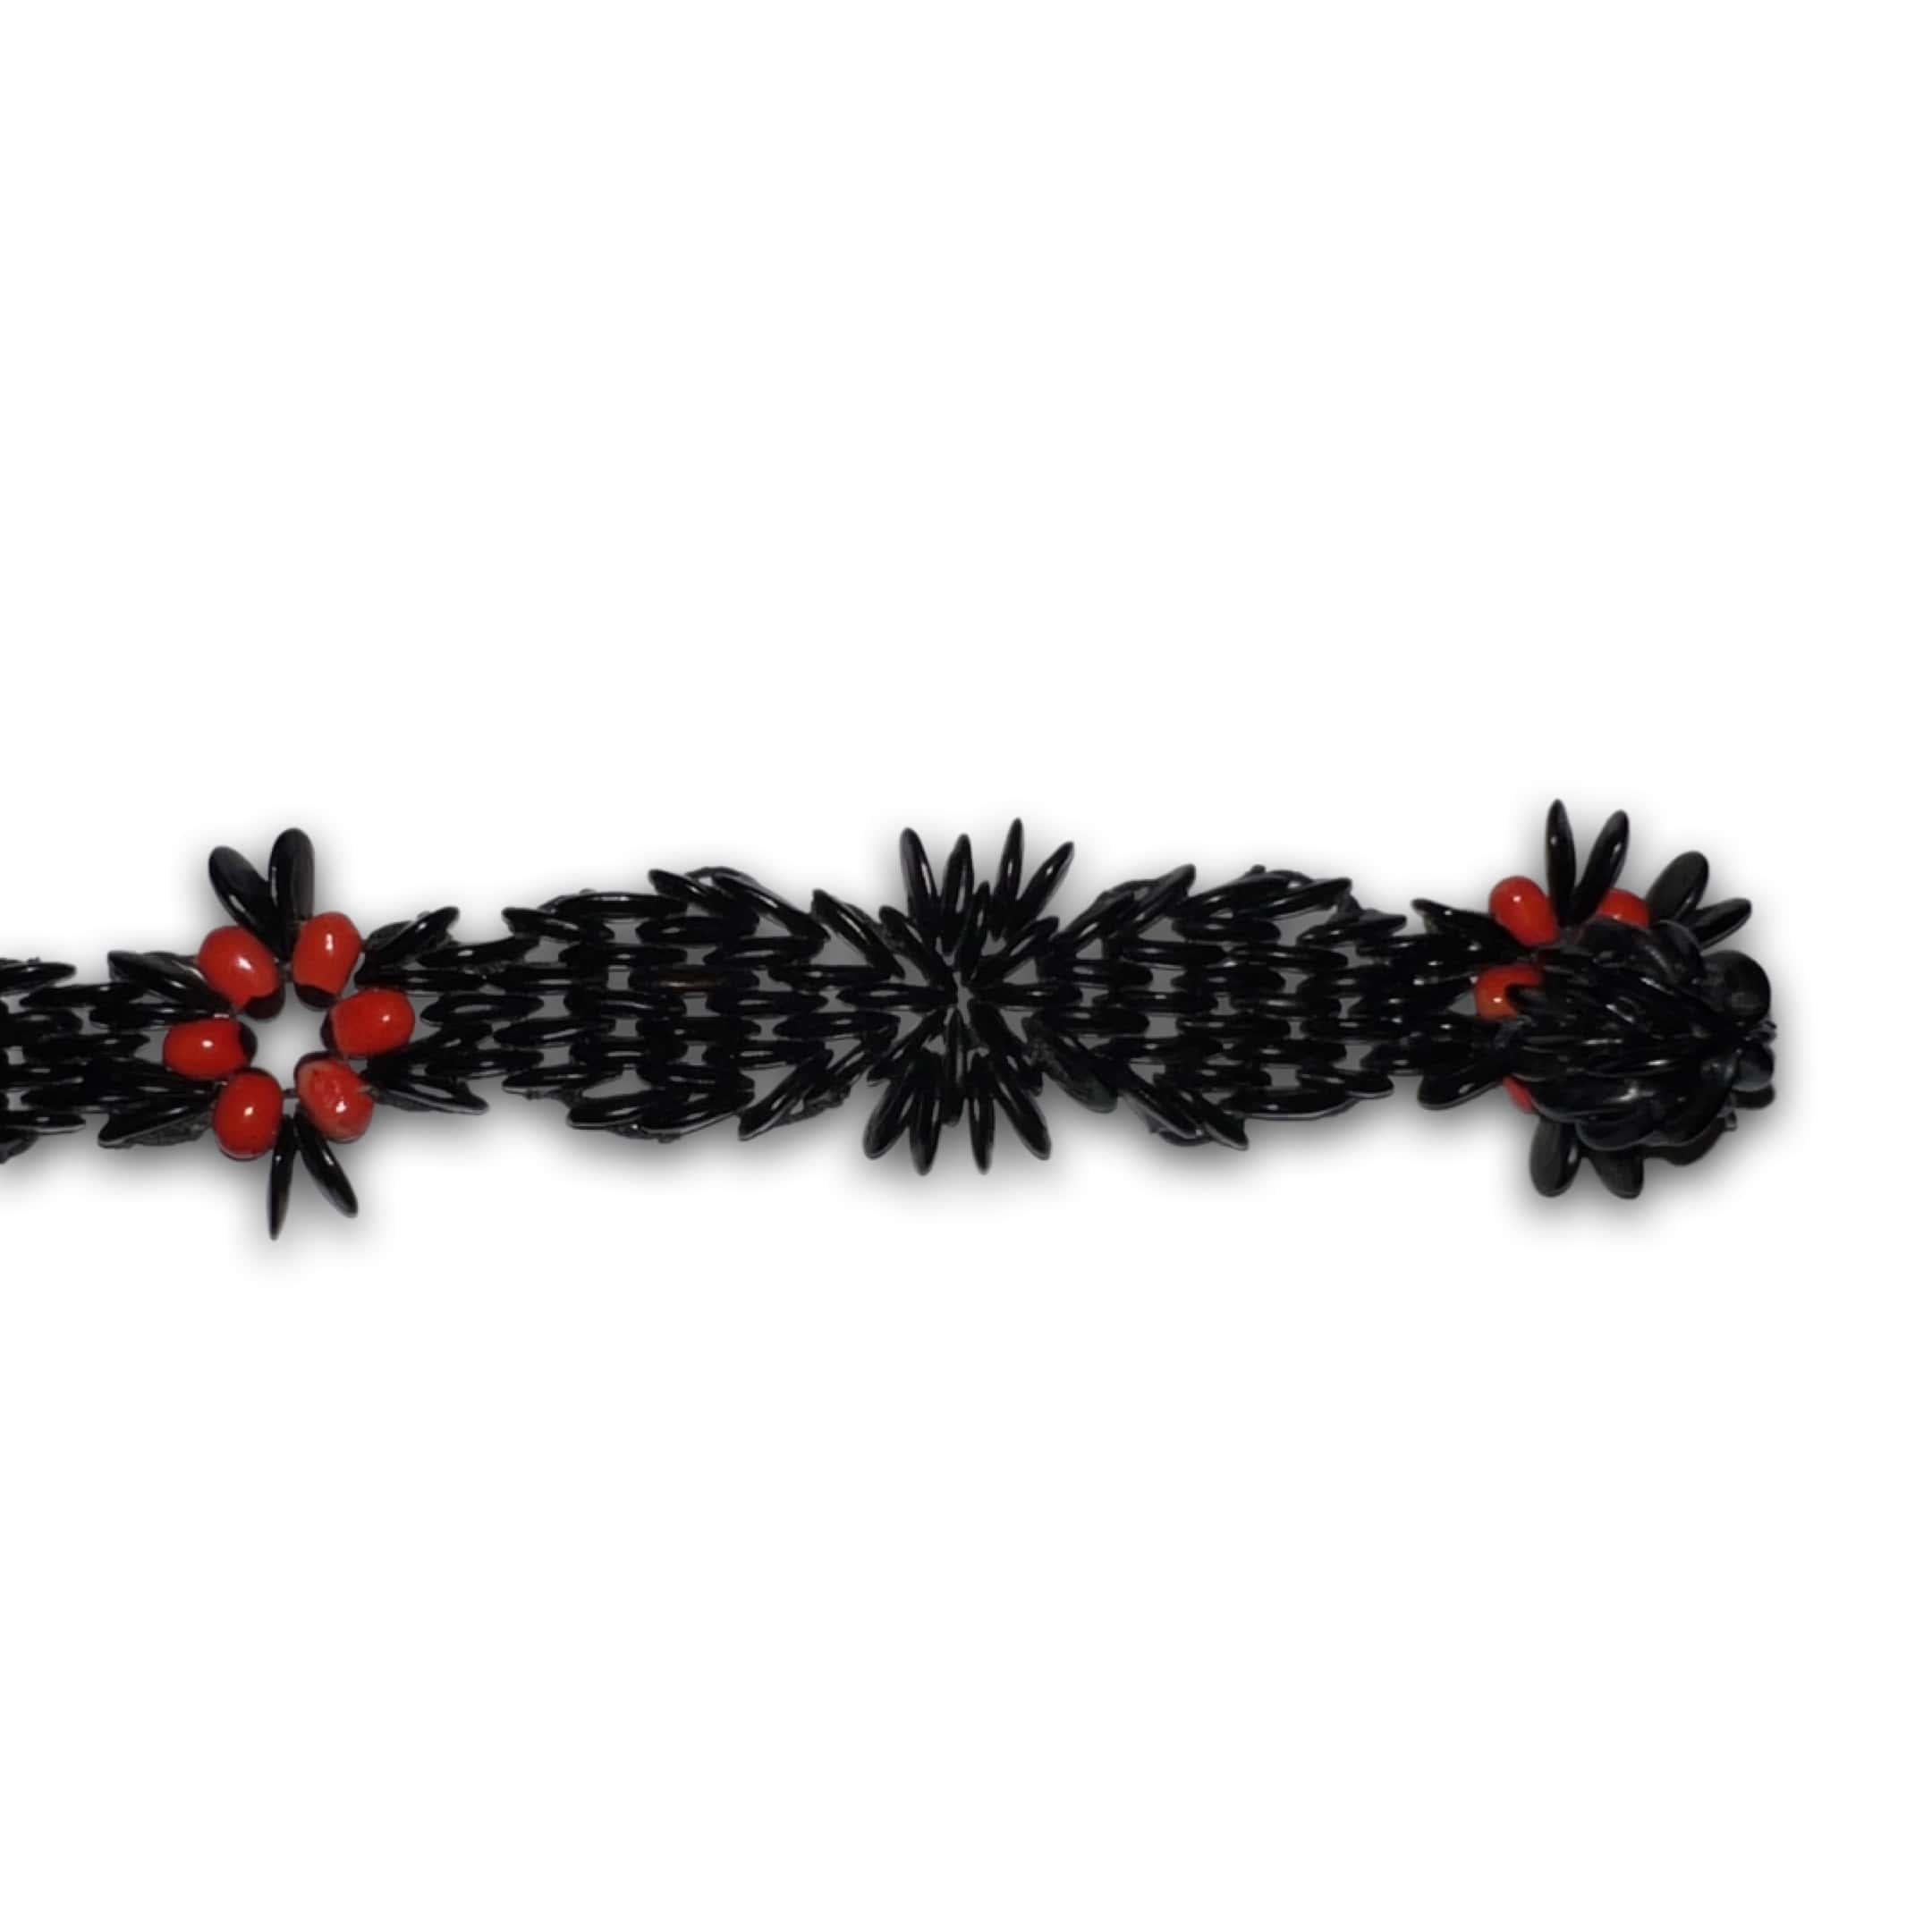 This unique 8” x .5” bracelet is inspired by the flag of Antigua and Barbuda and the Pan-African Flag. The wild tamarind seeds dyed black represent the black in both flags symbolizing Black peoples.

In contrast, the intricate tamarind seed patterns